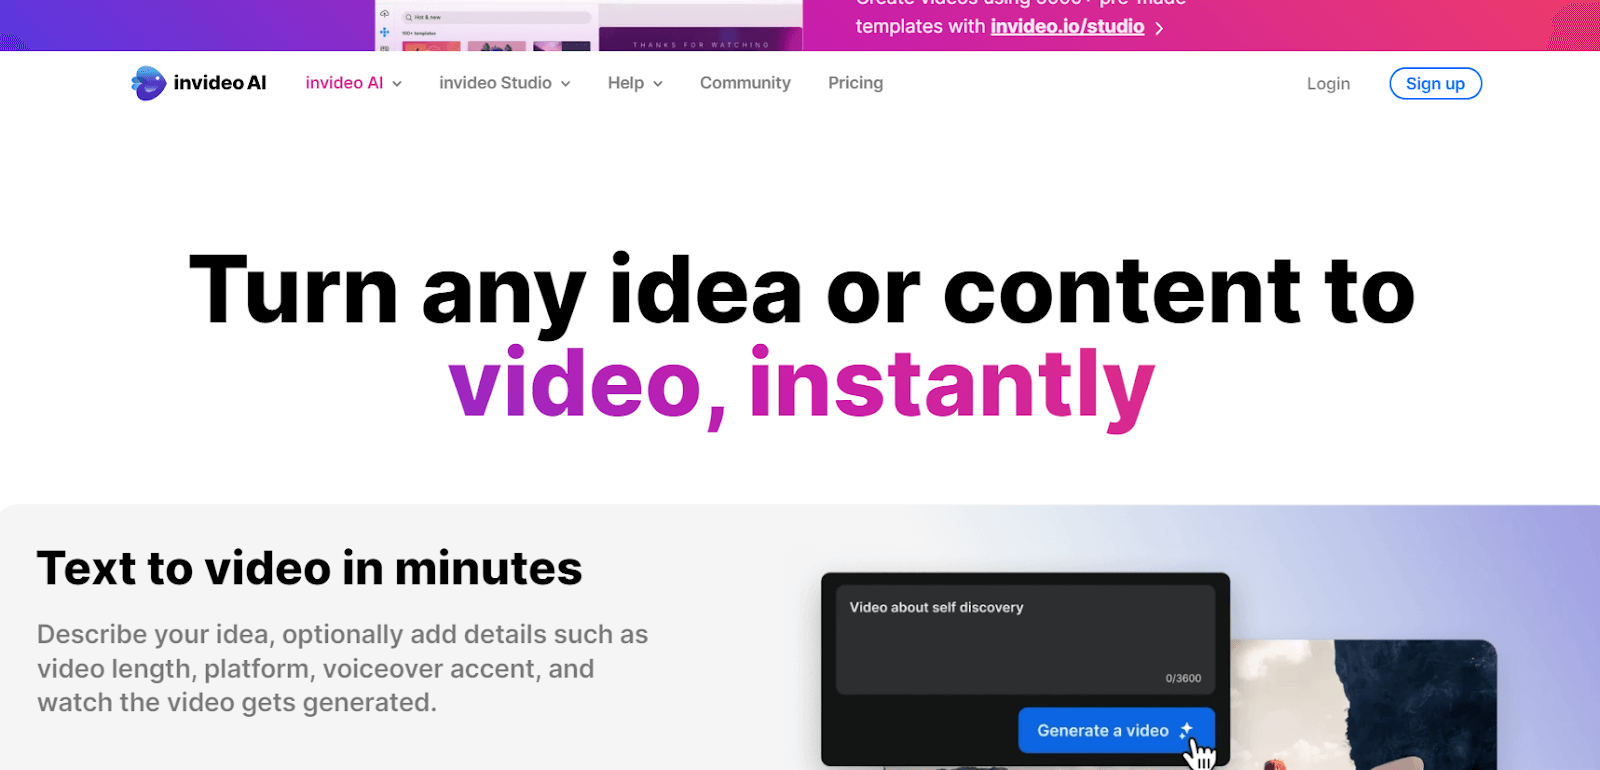 Turn any idea or content to video, instantly in 